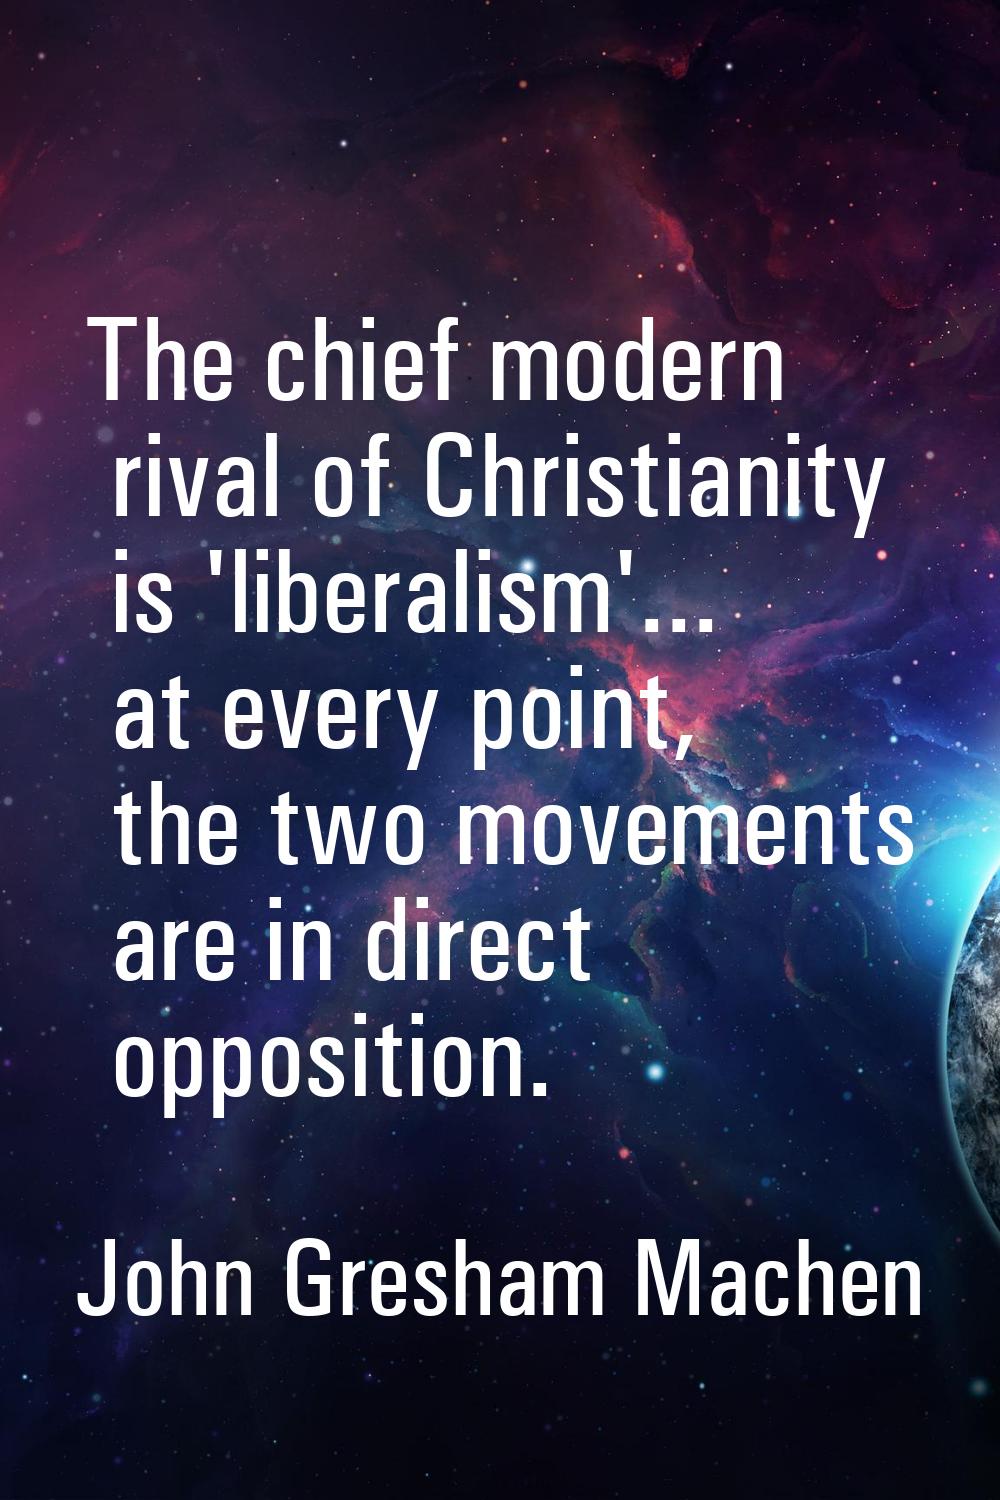 The chief modern rival of Christianity is 'liberalism'... at every point, the two movements are in 